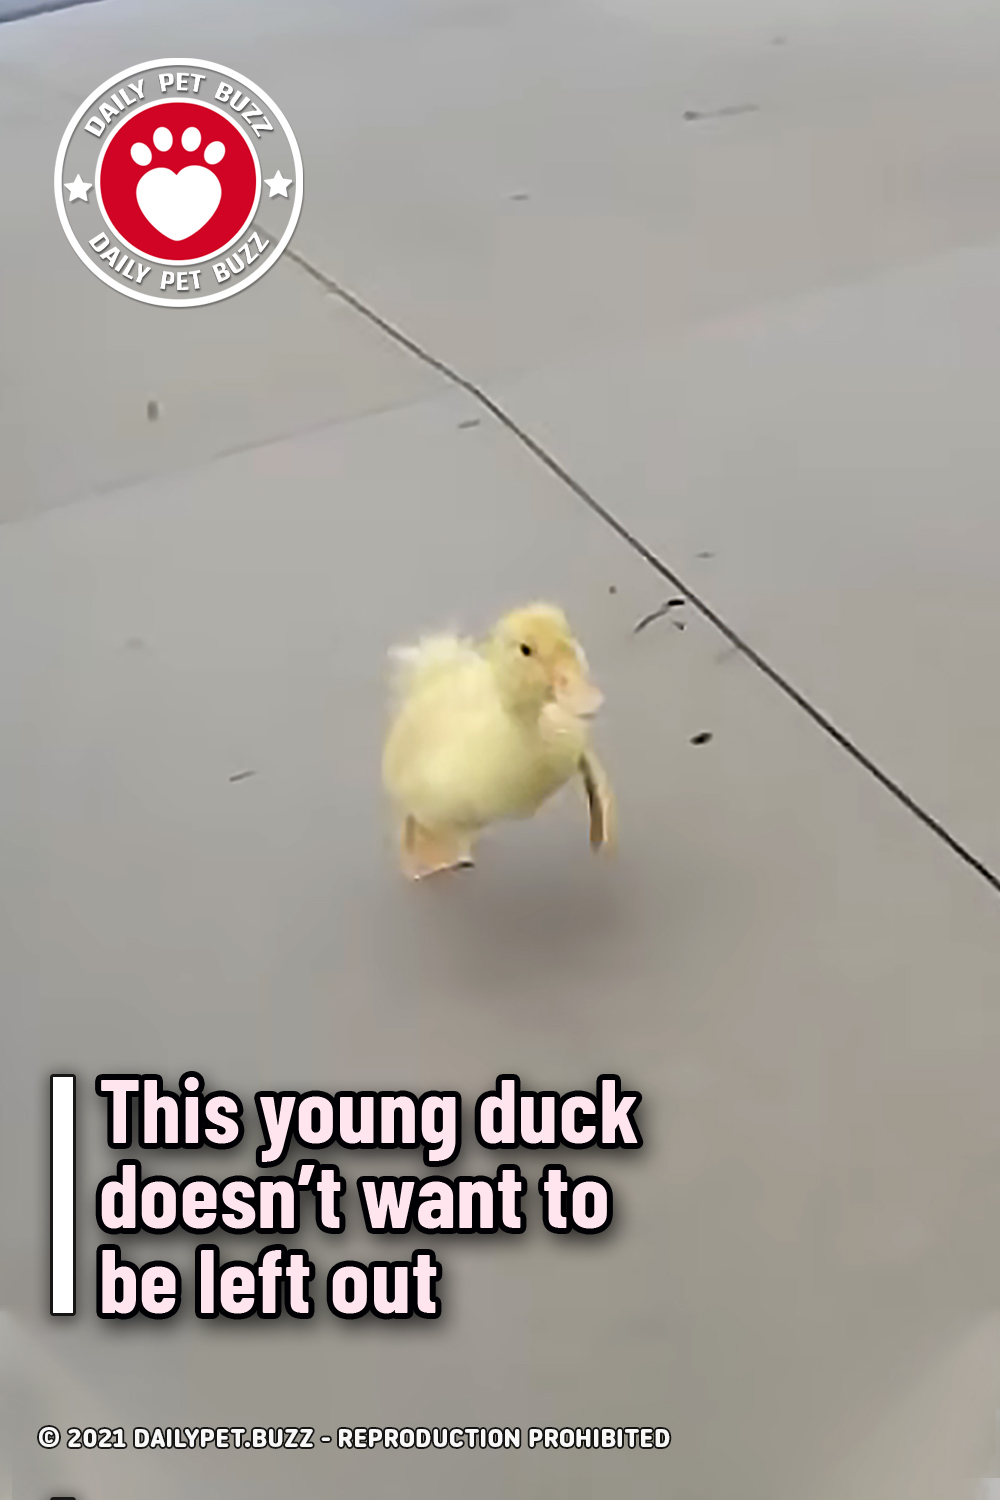 This young duck doesn’t want to be left out